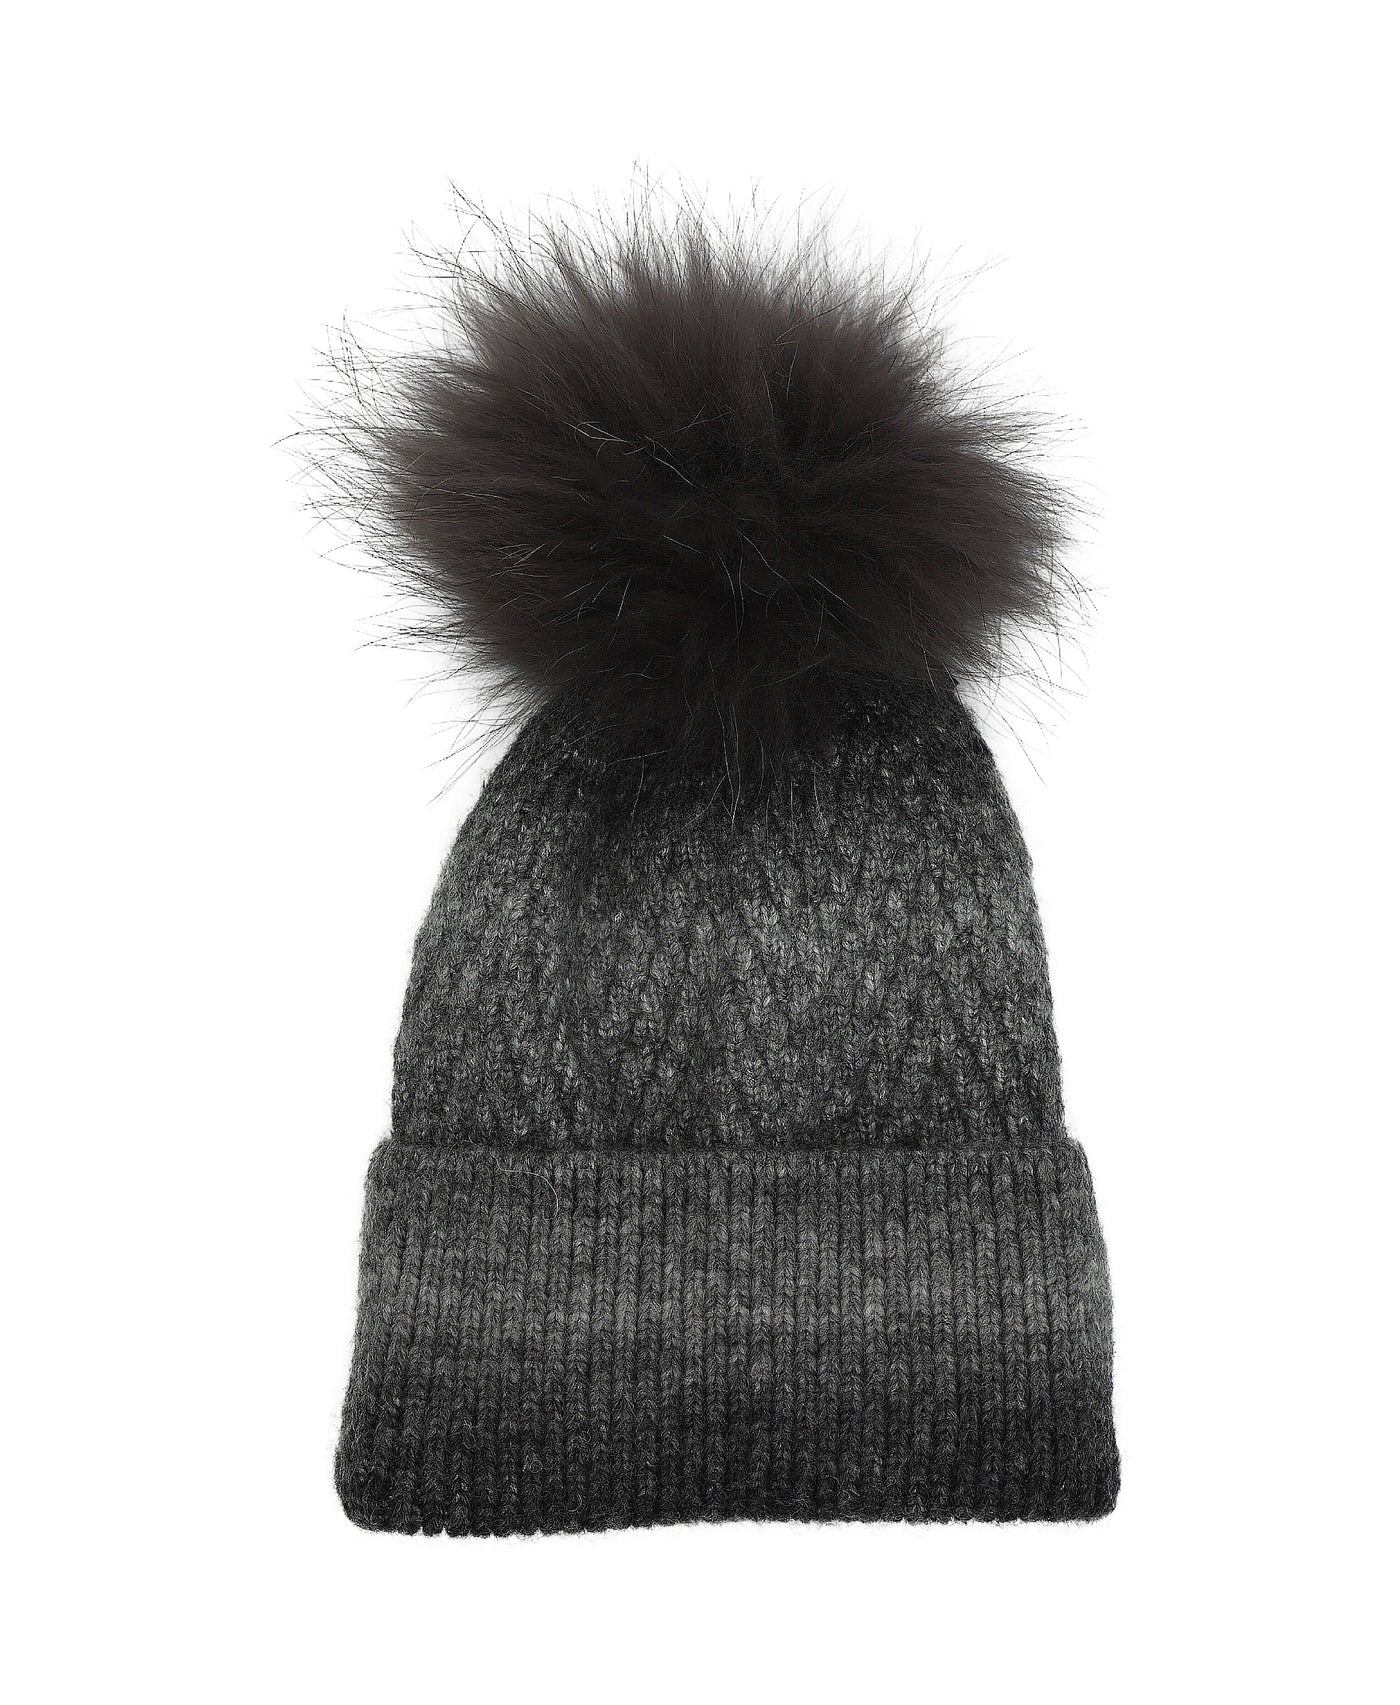 Ombre Quilted Knit Hat w/ Fur Pom image 1